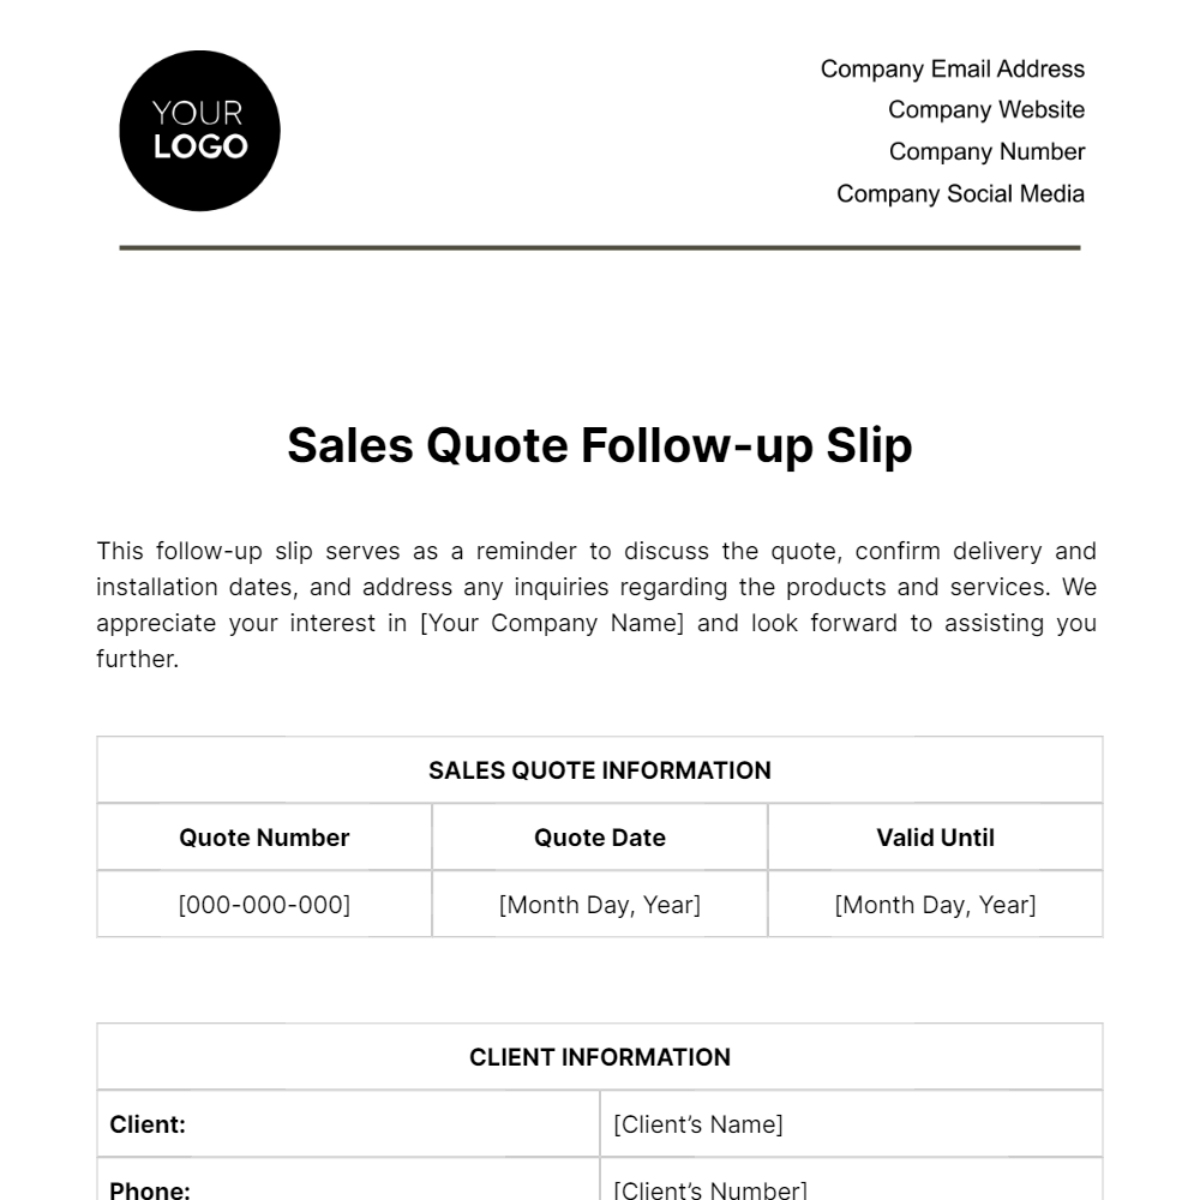 Sales Quote Follow-up Slip Template